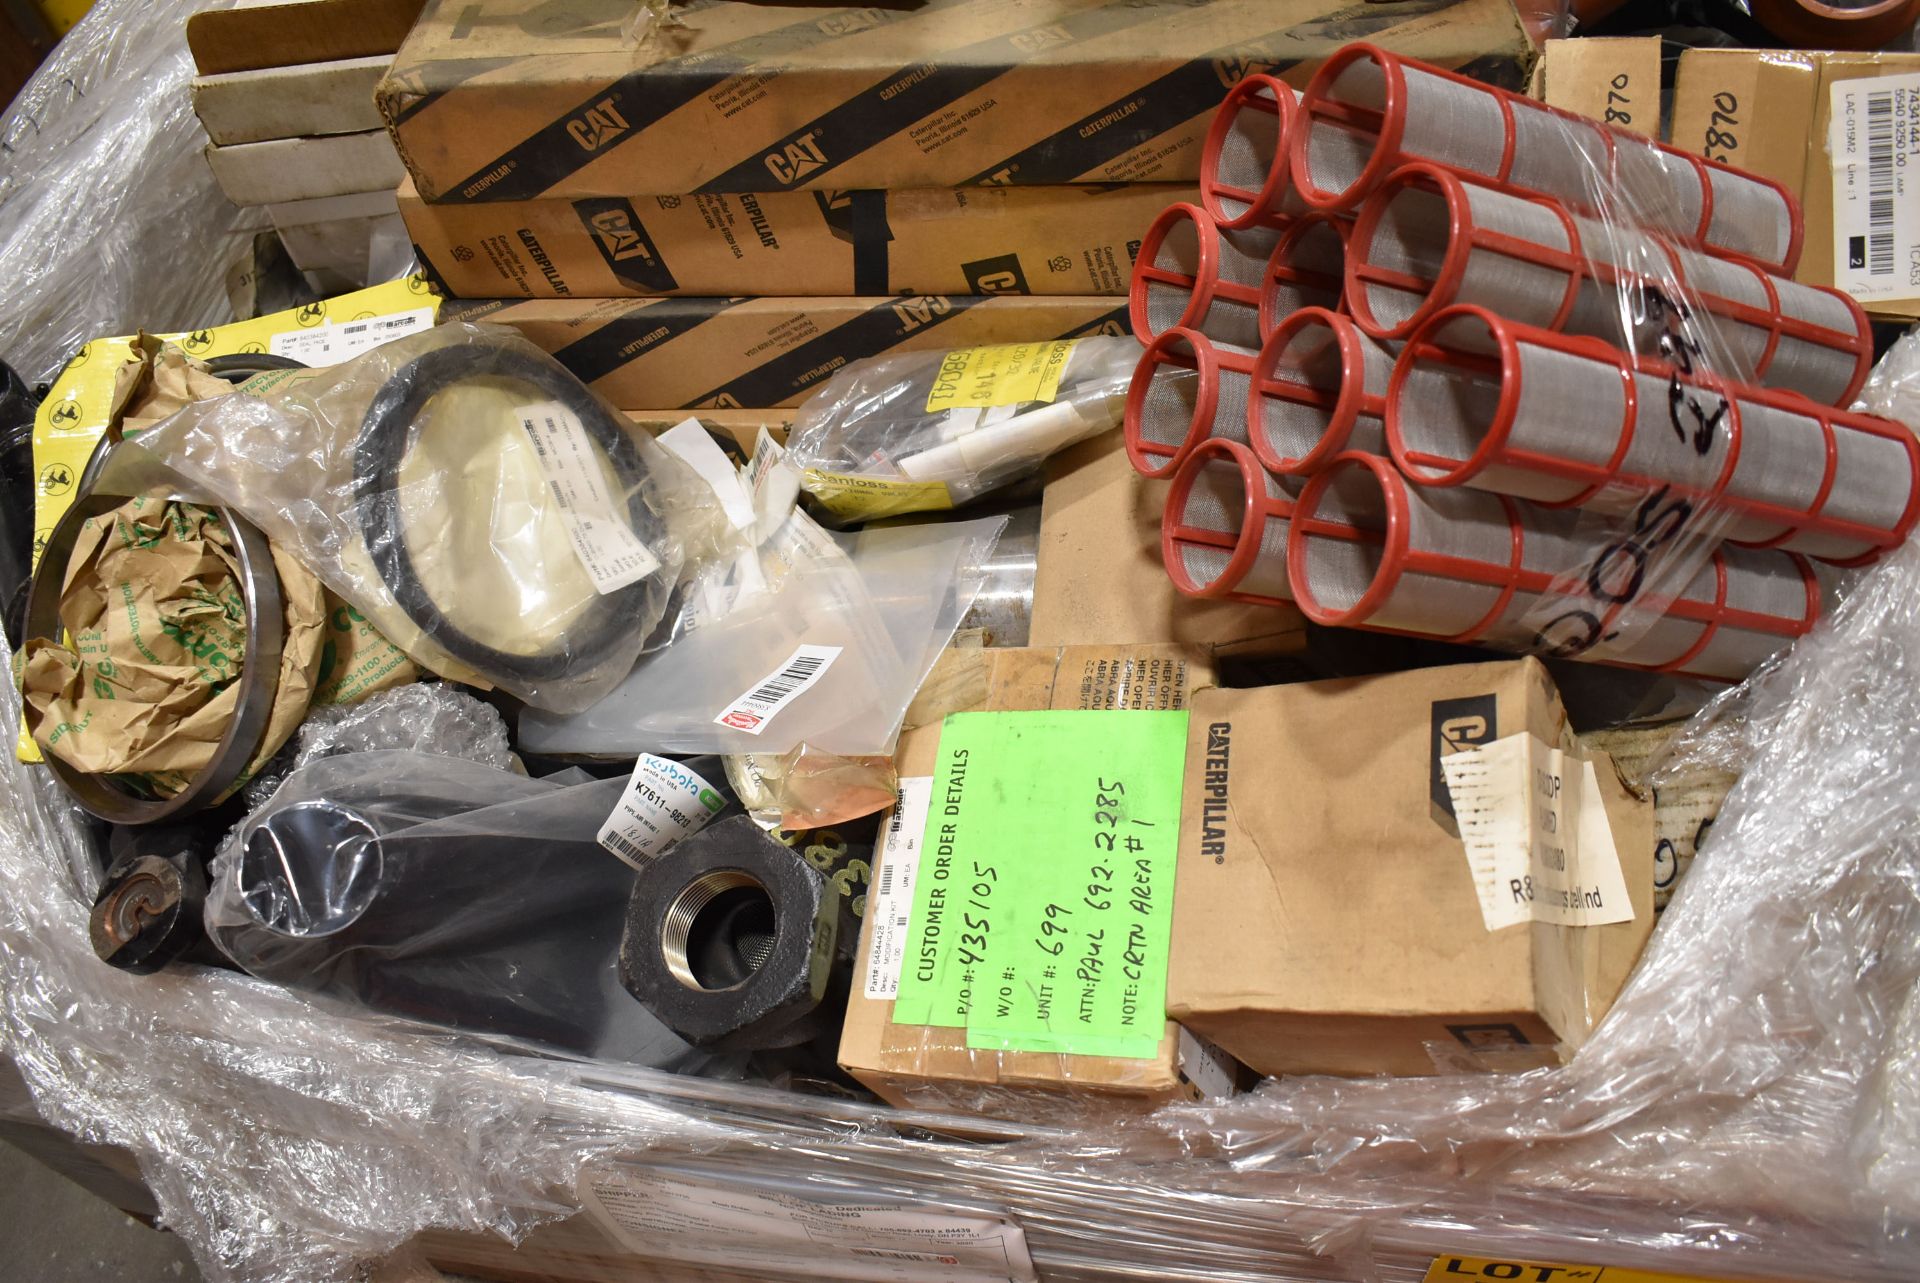 LOT/ SKID WITH MOBILE EQUIPMENT PARTS - INCLUDING FILTERS, GASKETS, HOSE, MANIFOLDS, BEARINGS, - Image 2 of 10